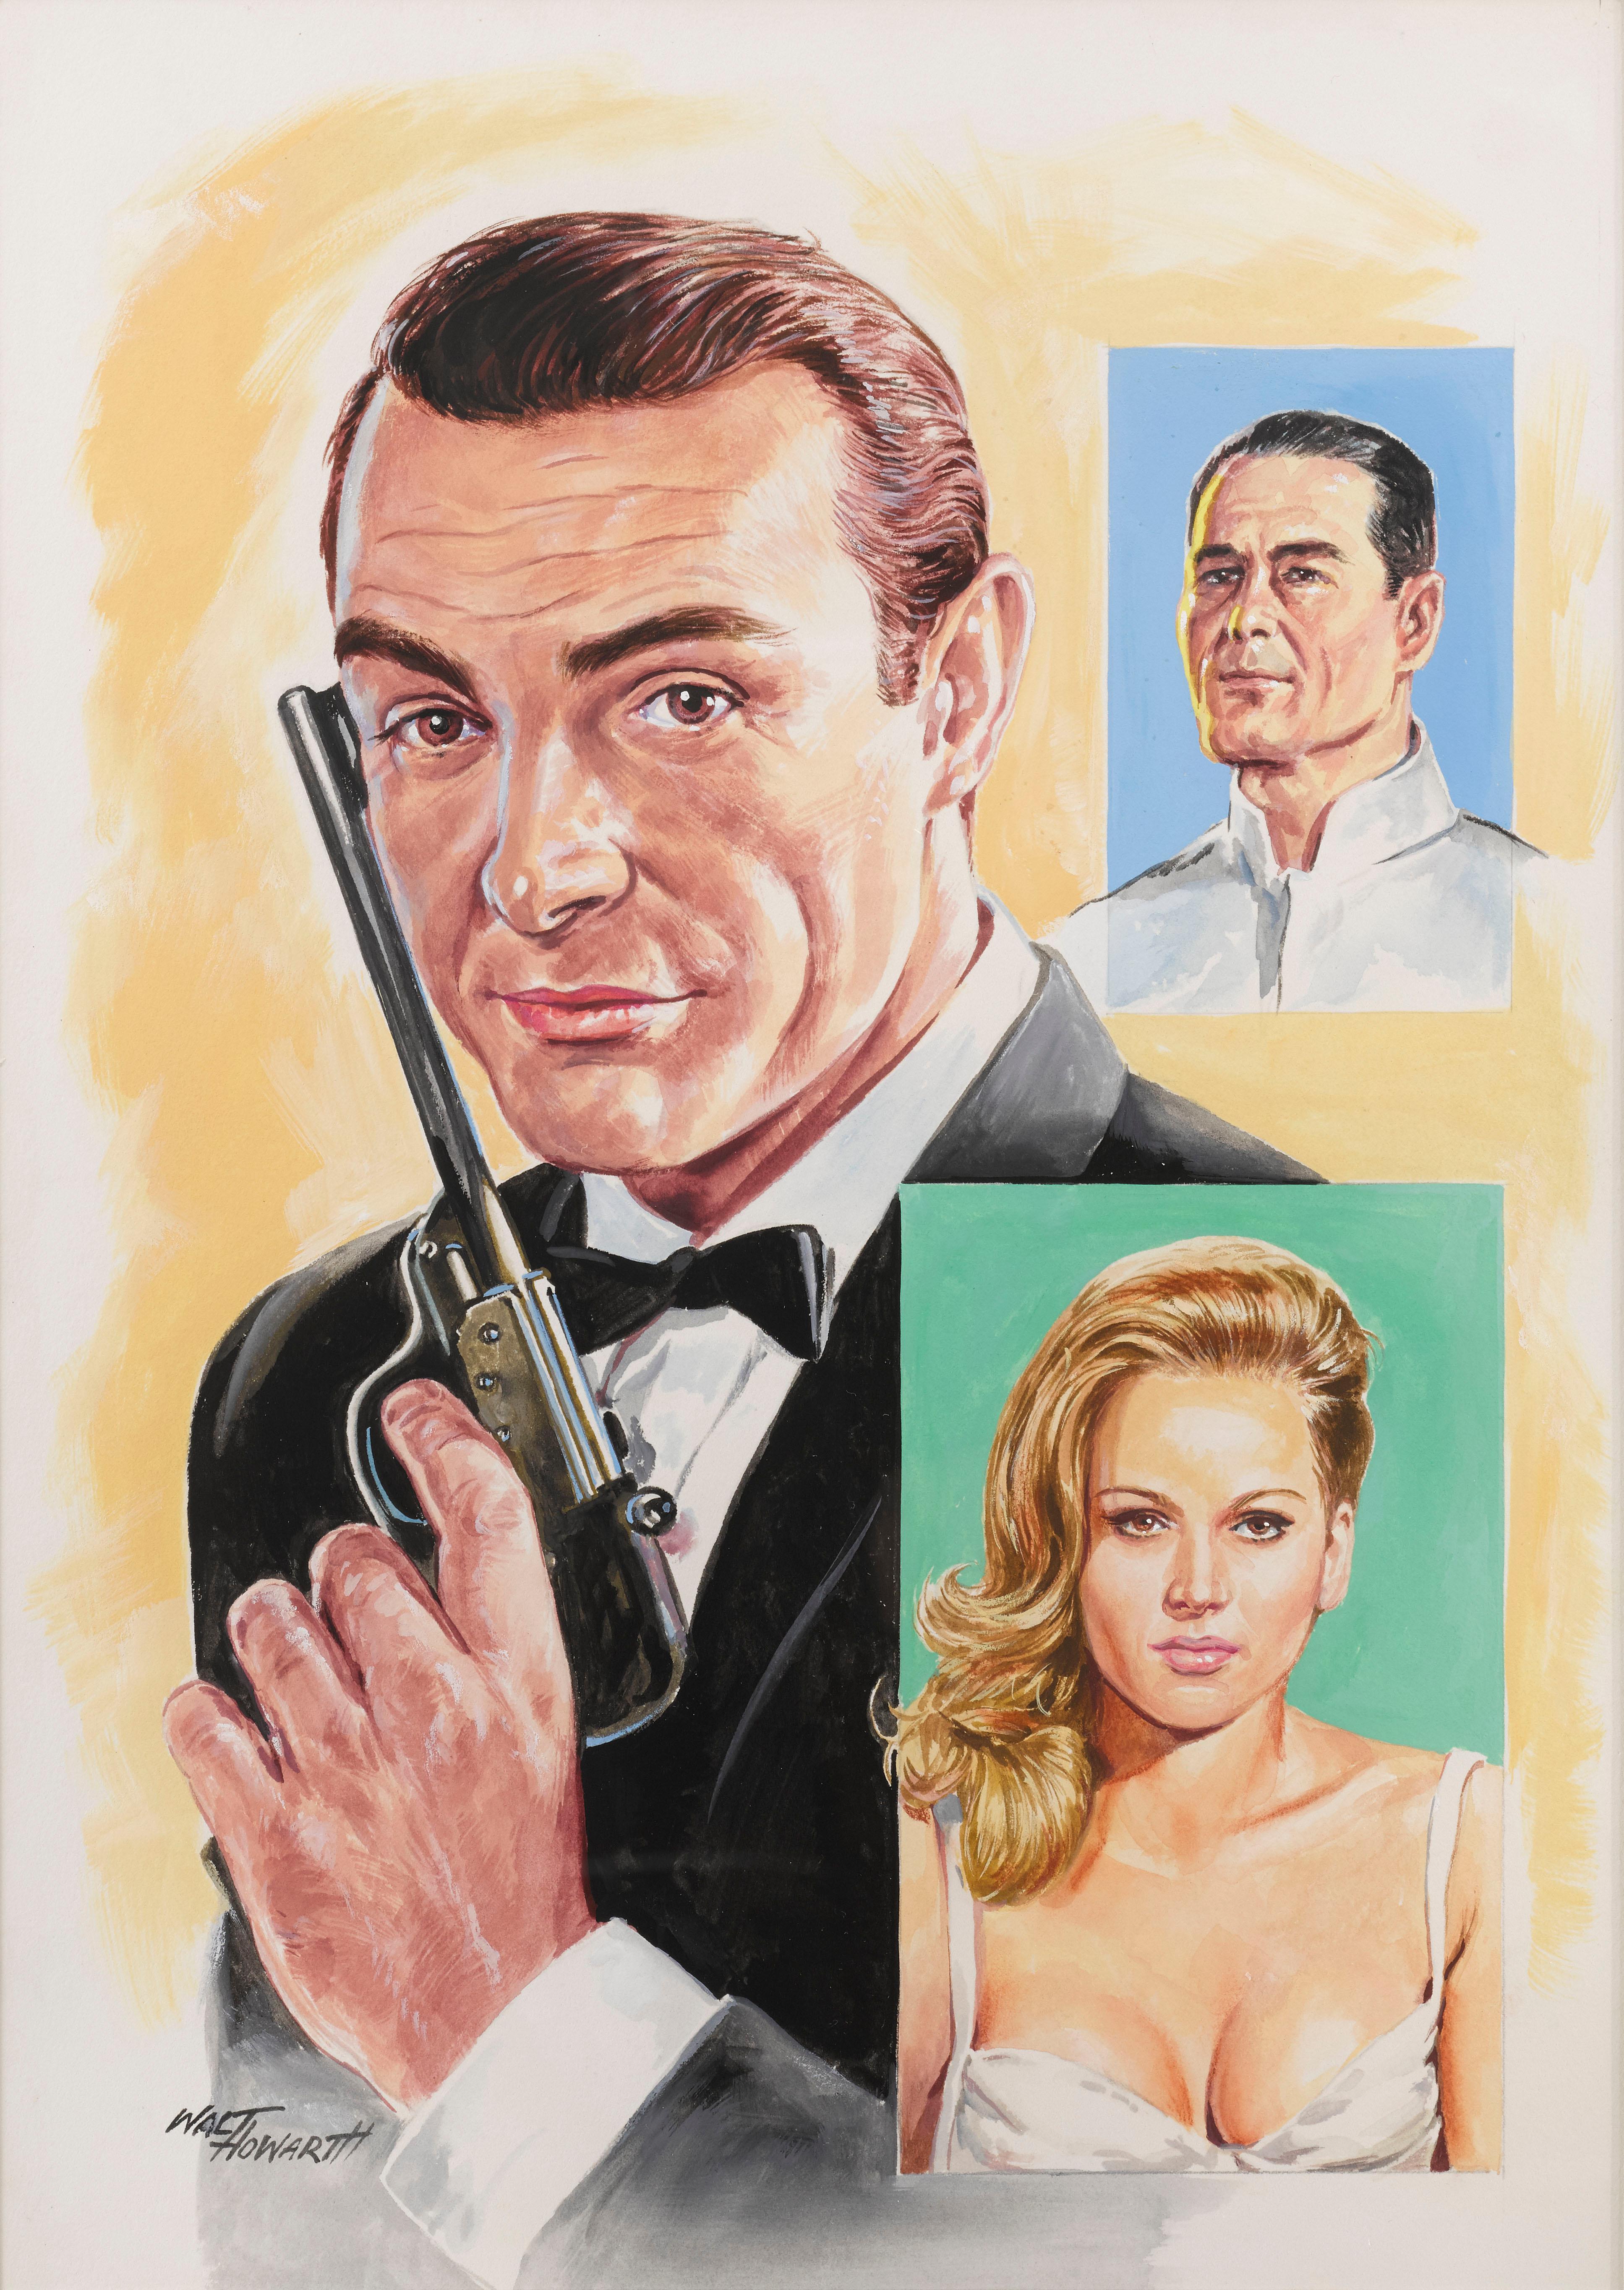 Original Artwork for the jigsaw puzzle commissioned by Arrow Games in 1967. Gouache on artboard by Walt Howarth (1928-2008)
Dr. No starring Sean Connery is the first James Bond film in 1962, based on the 1958 novel of the same name by Ian Fleming.